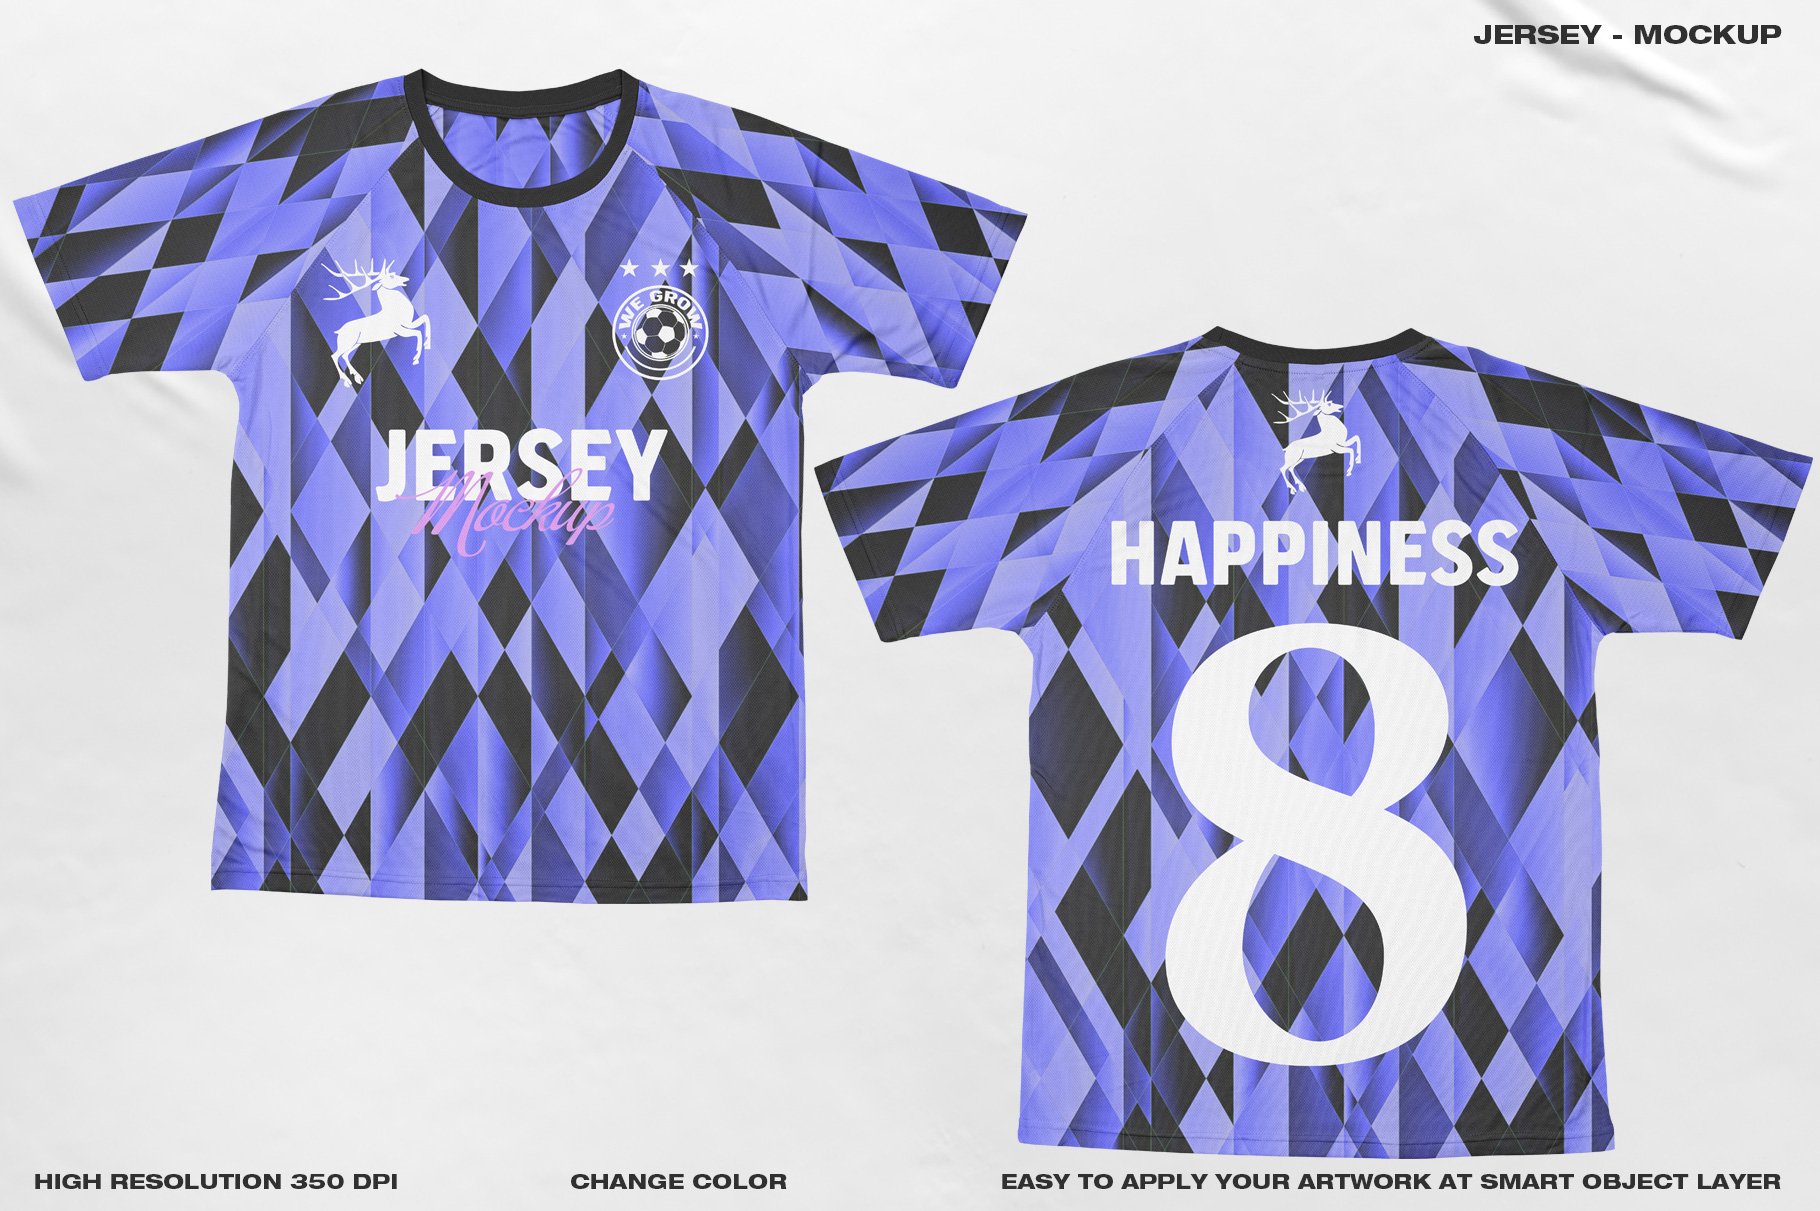 Jersey - Mockup preview image.